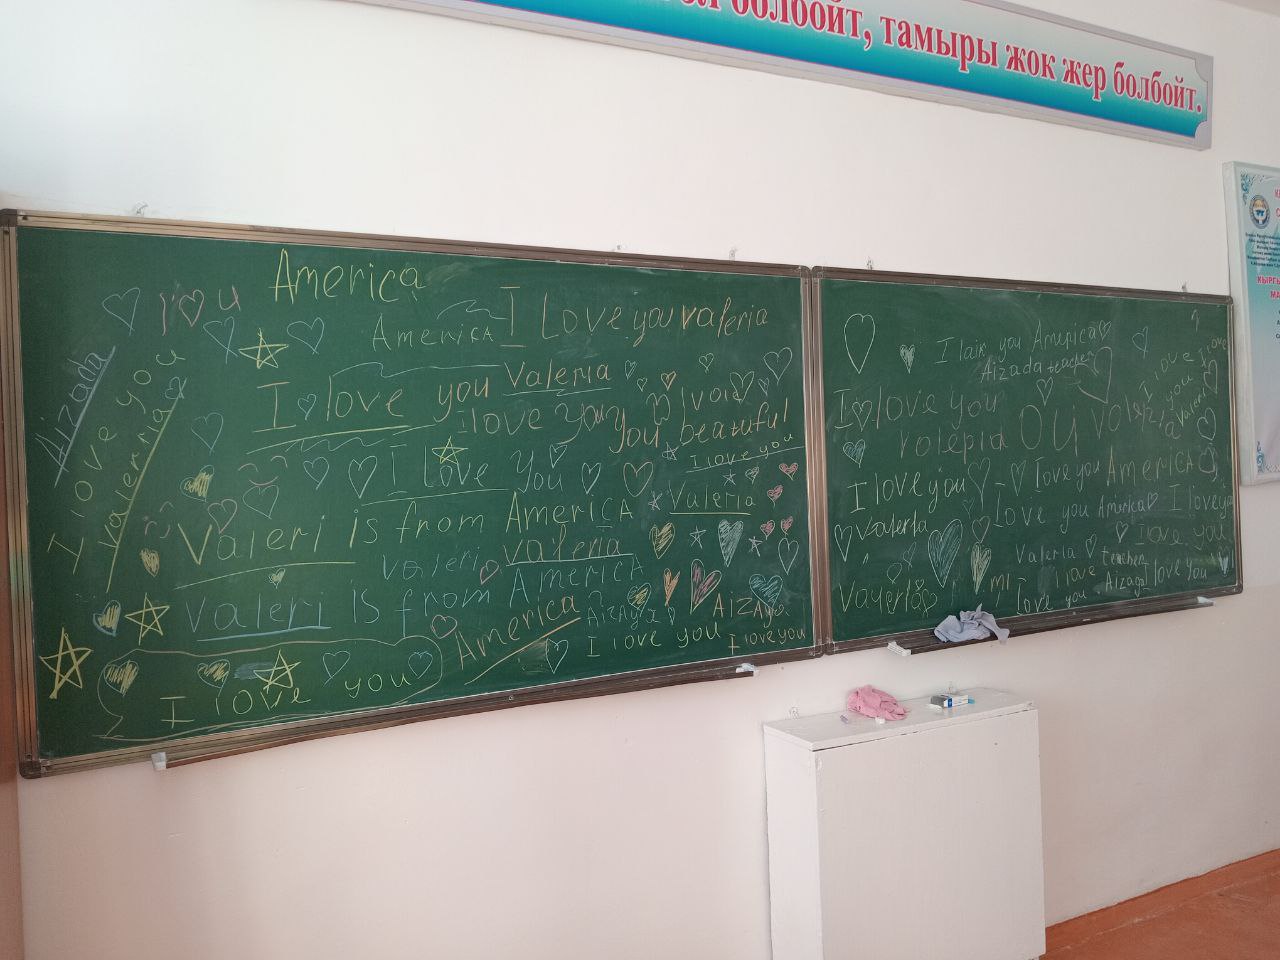 two chalkboards side by side covered in hearts and English sentences like "I love you", "I love you Valeria", "I love you America" and "I love you Aizada" (my coteacher's name)